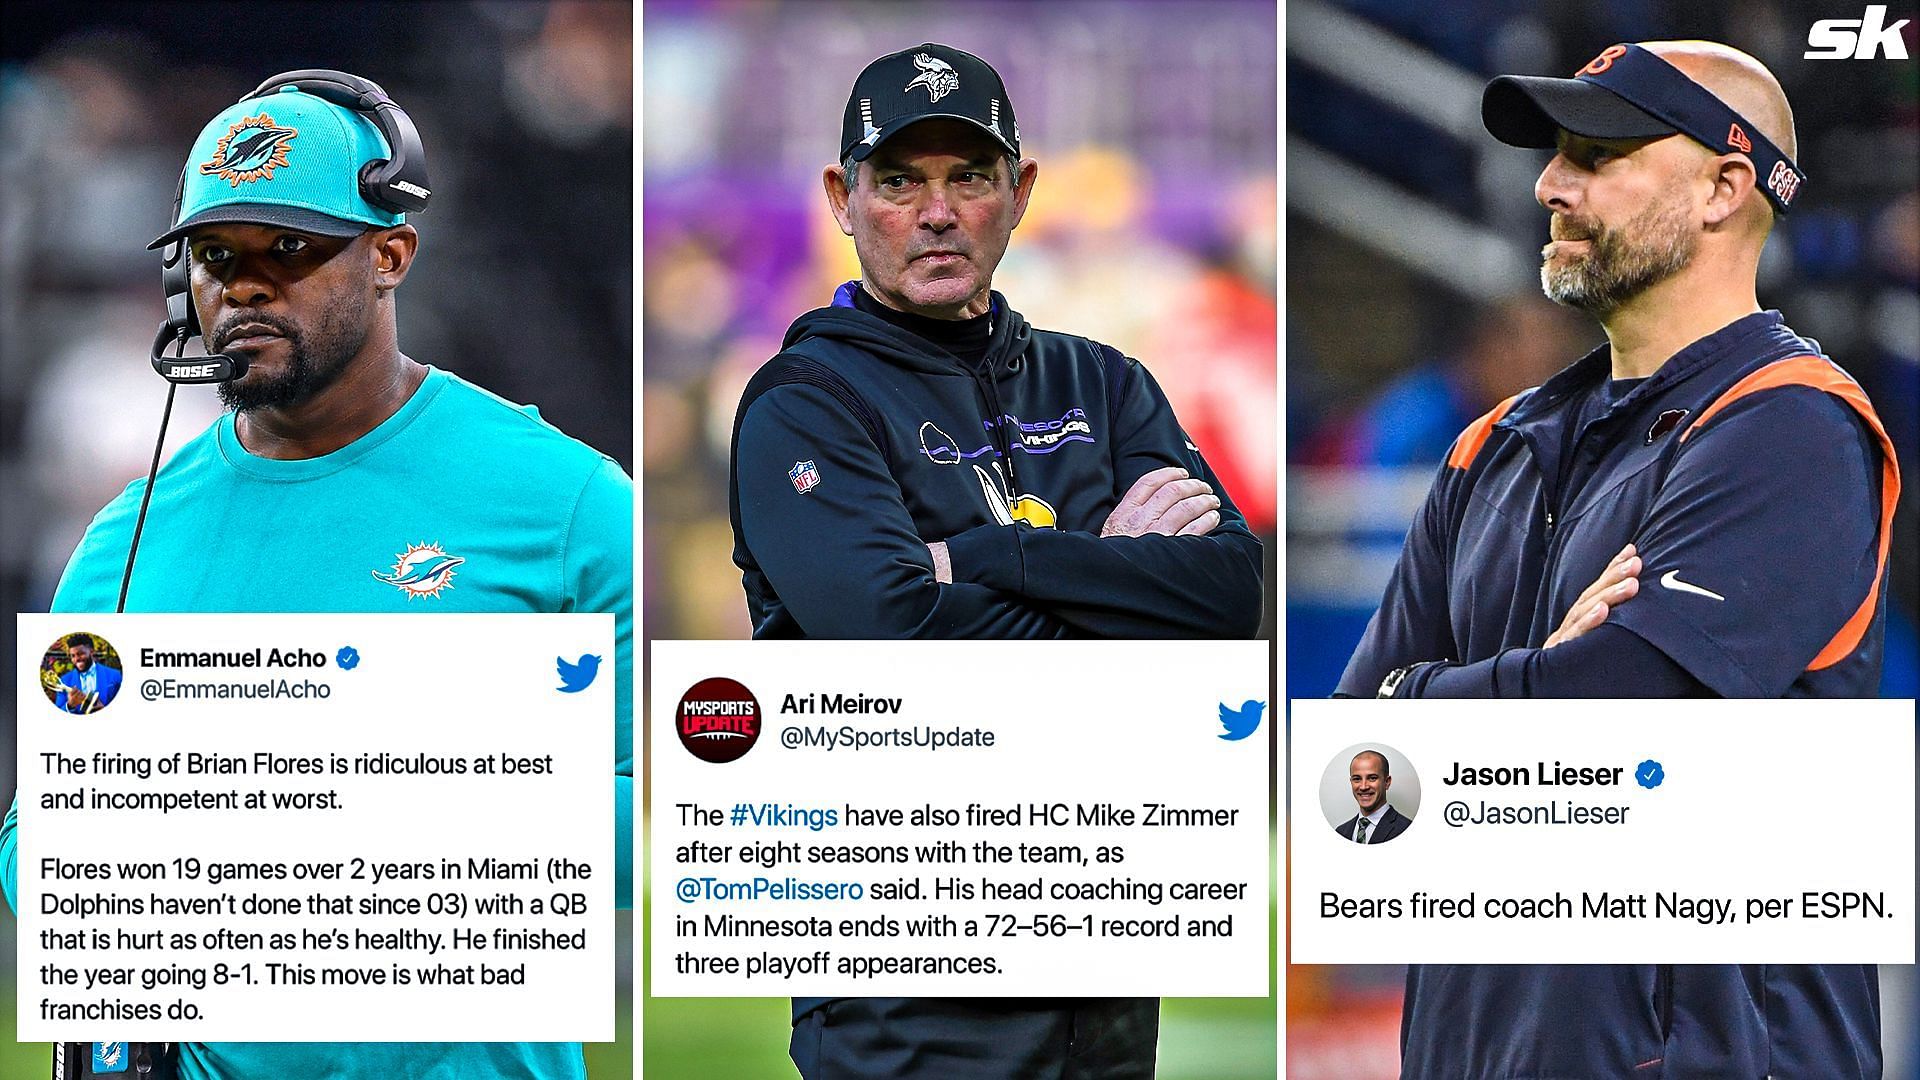 NFL fans take to social media to voice their opinions on the NFL&#039;s &quot;Black Monday&quot; firings.